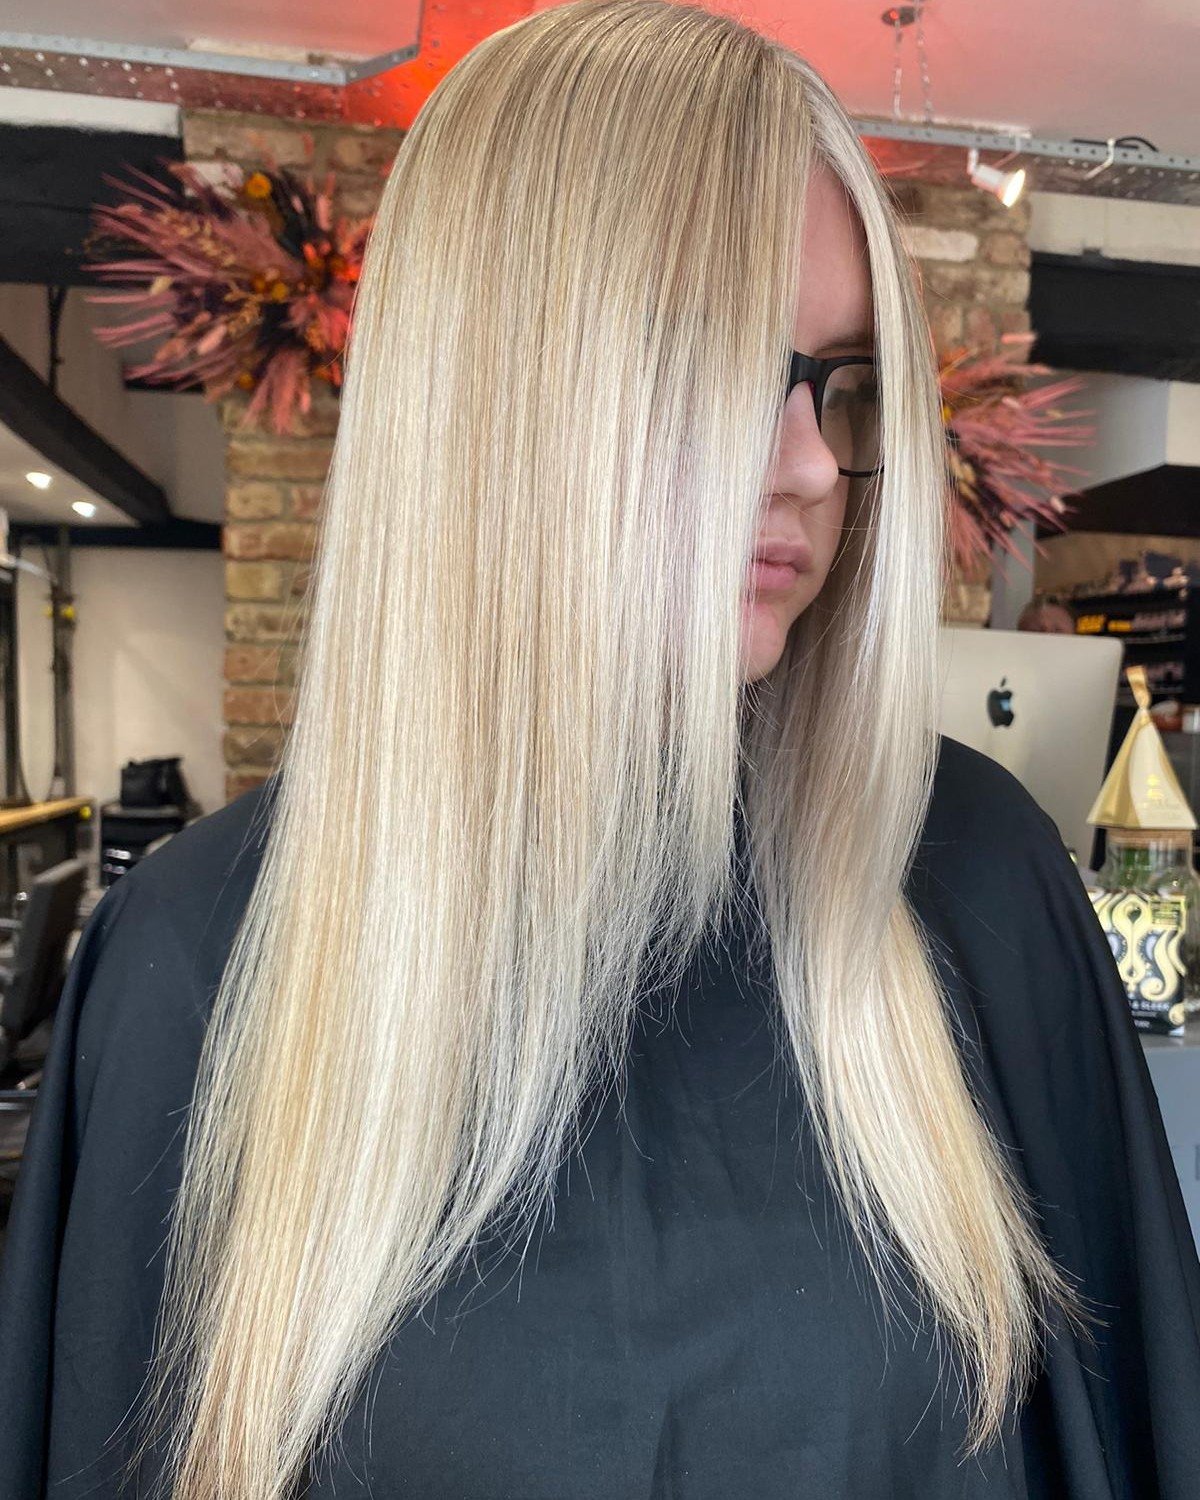 ...Back with a bang! 💥💛

👉 Full head highlights, toner and style by the amazing @hairbymadisonmear_ 

📞 01903 205721
📍High St, Worthing

.
.
.

#worthing #westsussex #sussex #hair #hairdresser #hairstyle #blondehair #longhair #hairinspo #hairtra